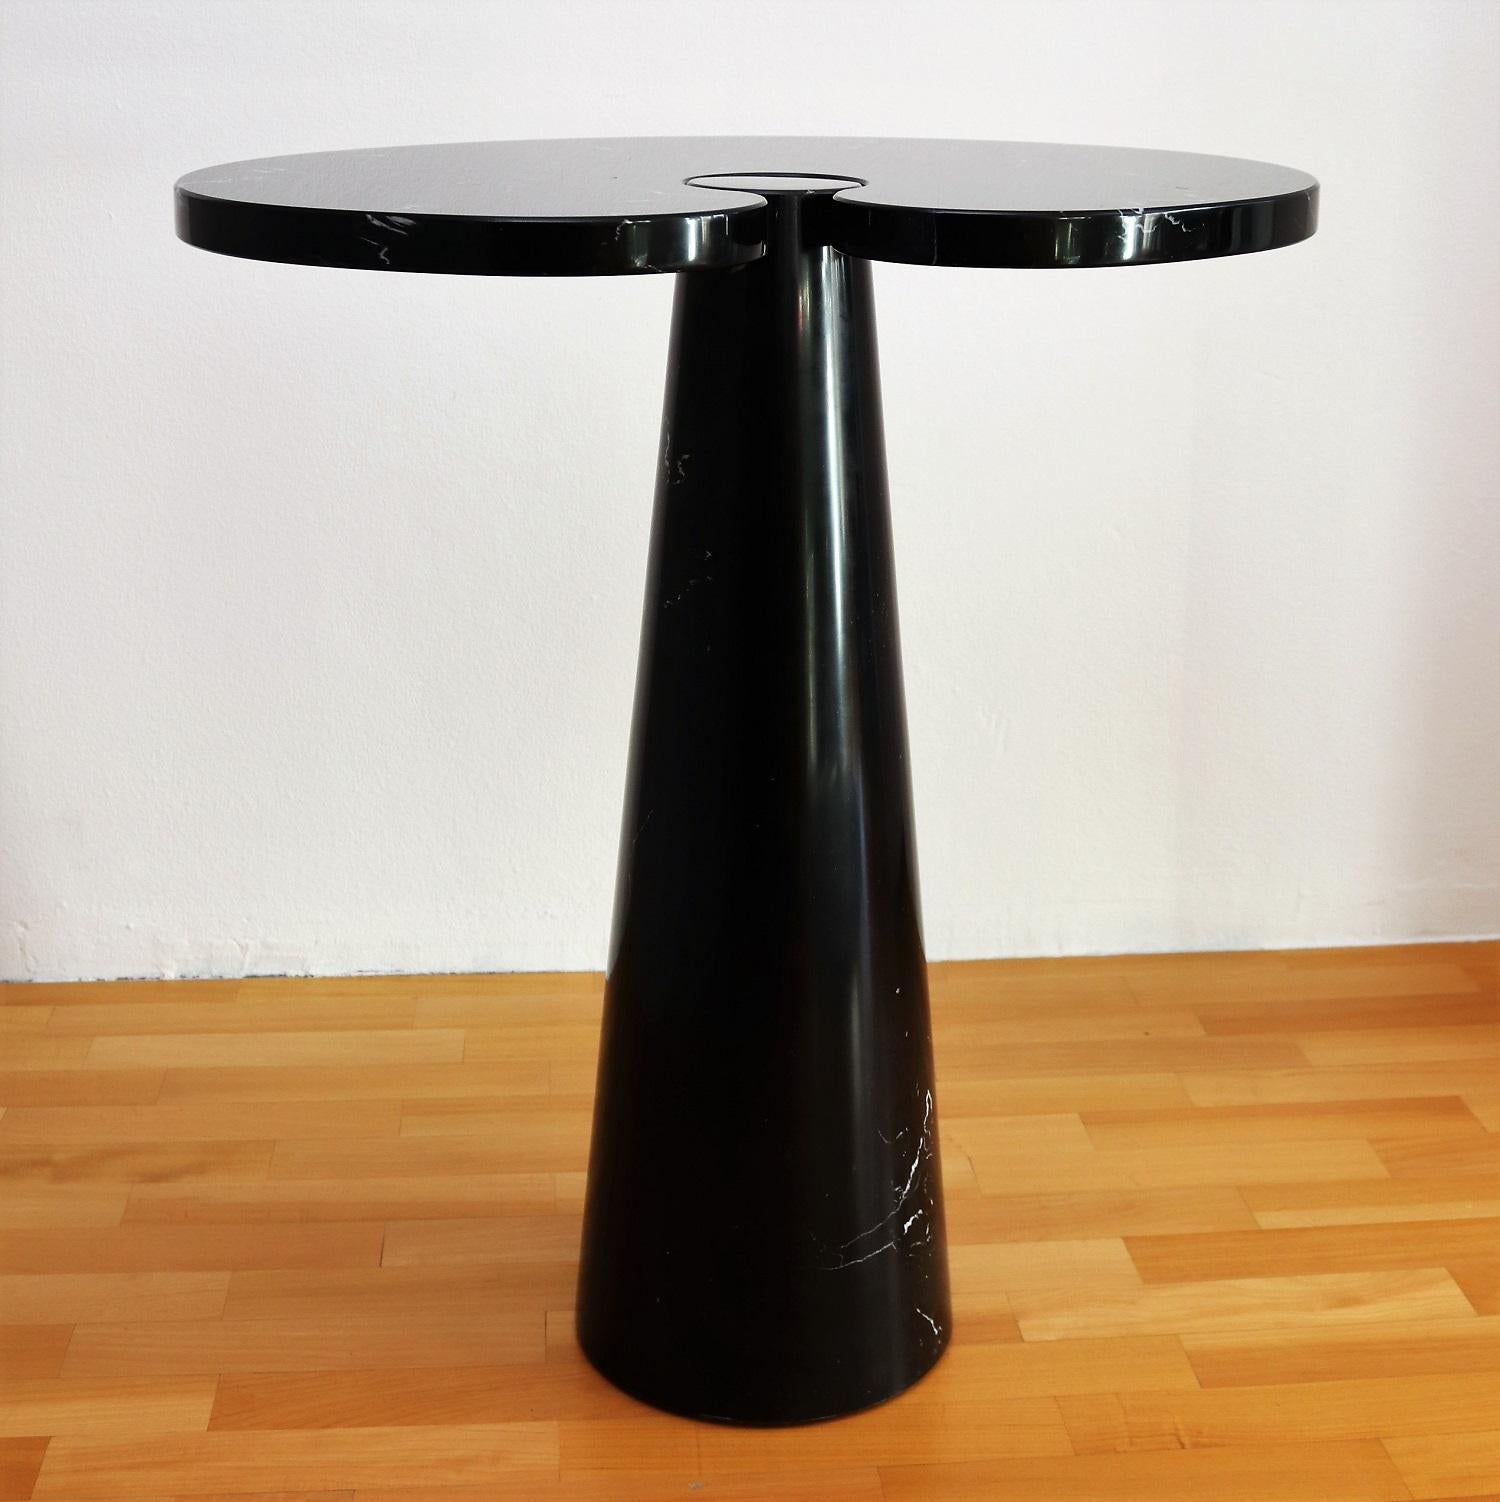 Polished Italian Eros Marquina Marble Side Table by Angelo Mangiarotti for Skipper, 1970s